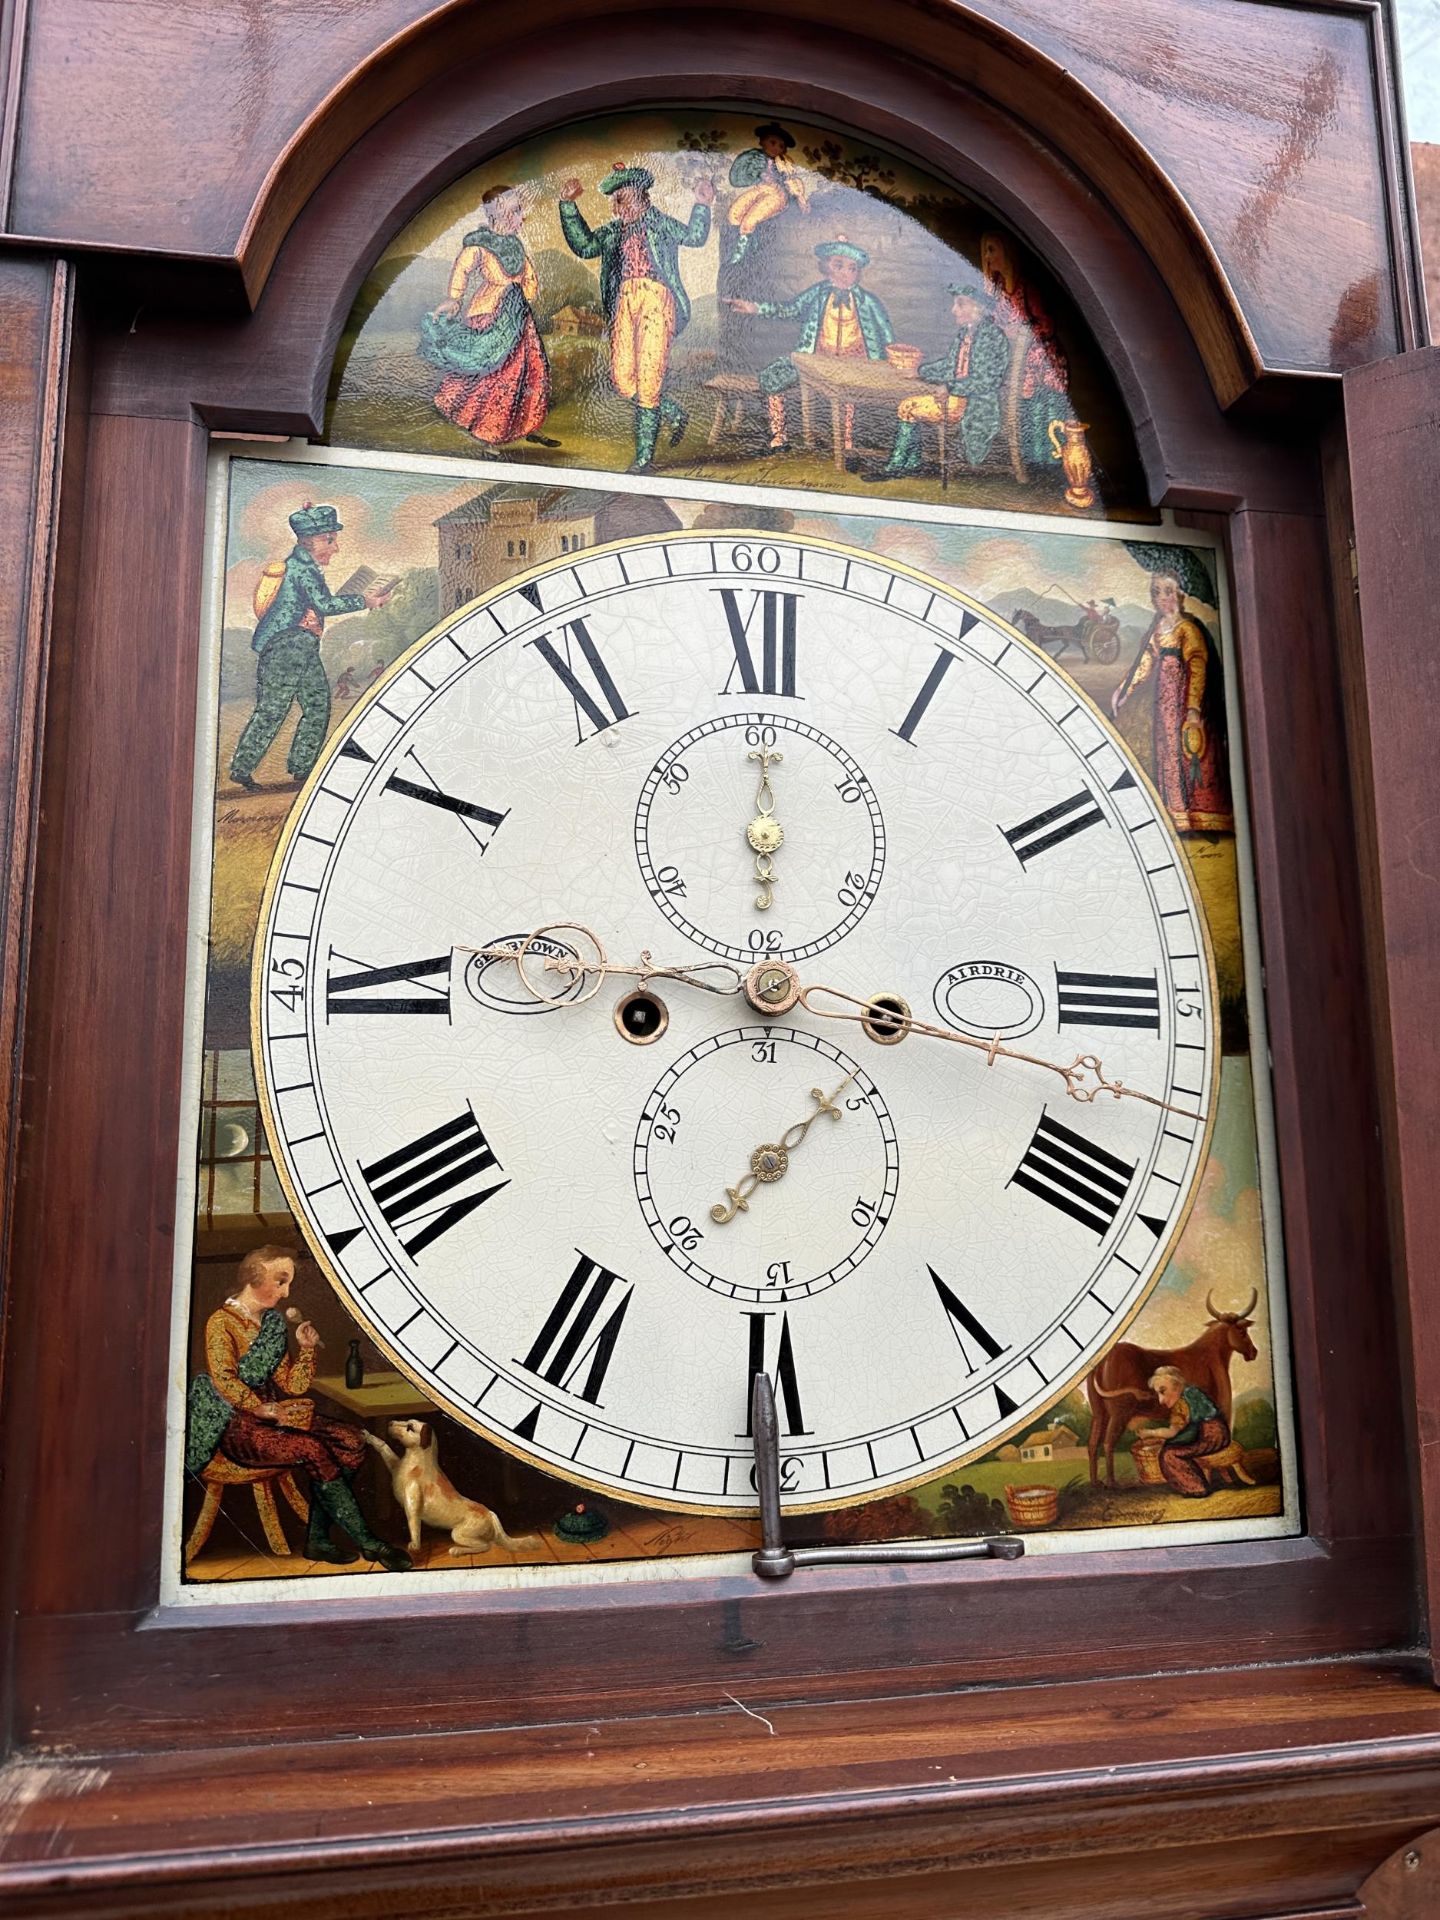 A MAHOGANY LONGCASE CLOCK BY GEO BROWN AIRDRIE WITH PAINTED DIAL DEPICTING MORNING, NOON, EVENING - Image 3 of 5